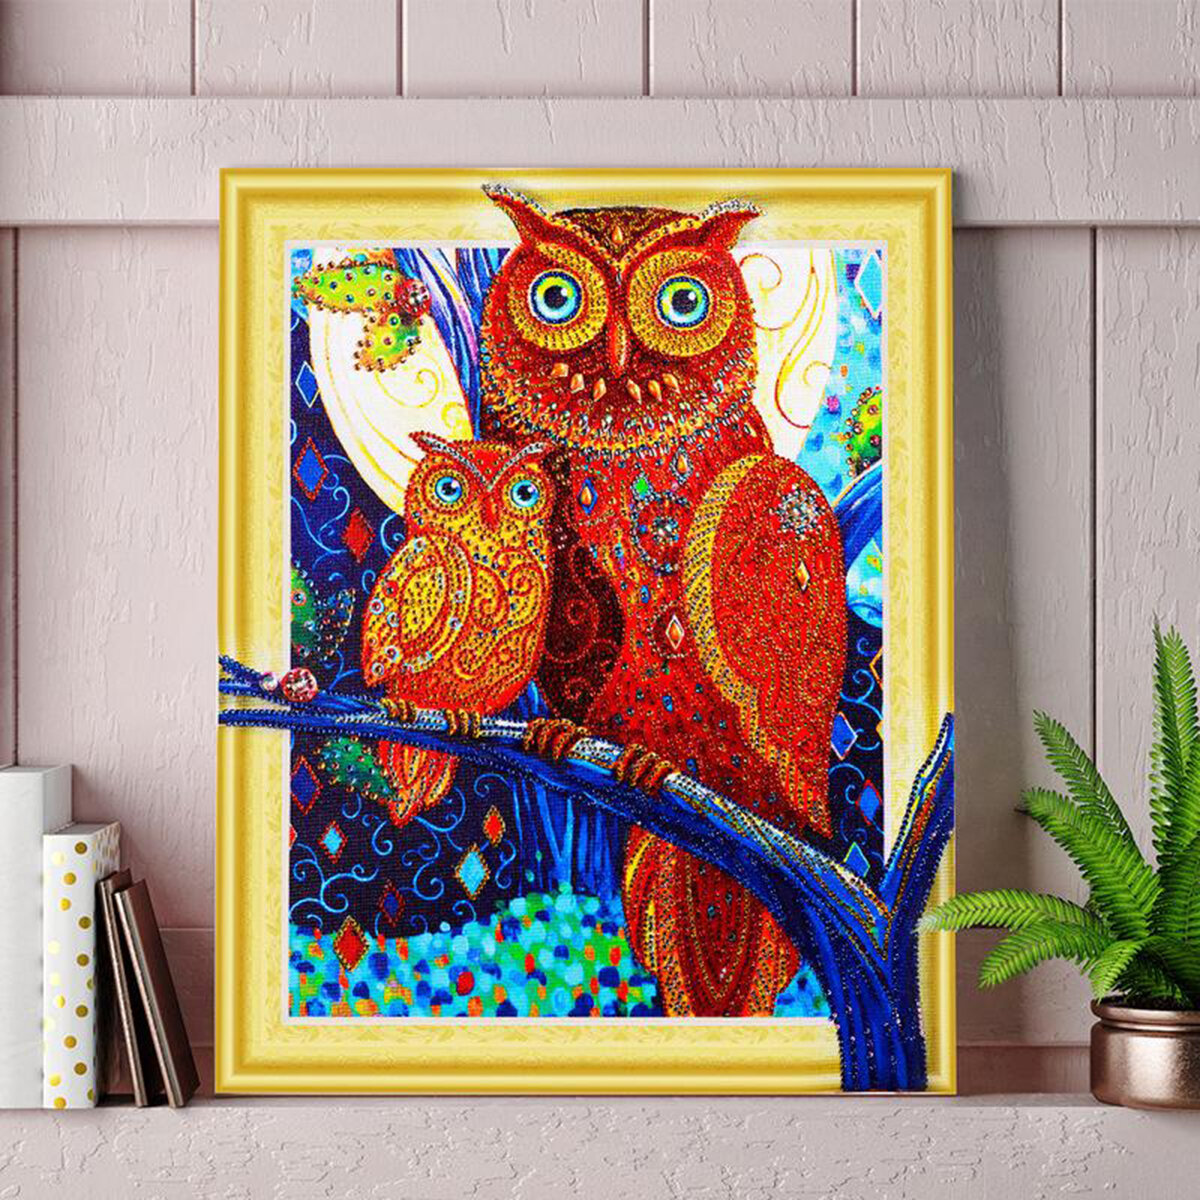 5D Diamond Painting Horse Owl Lion Embroidery Cross Stitch Kit Home Office Decorations